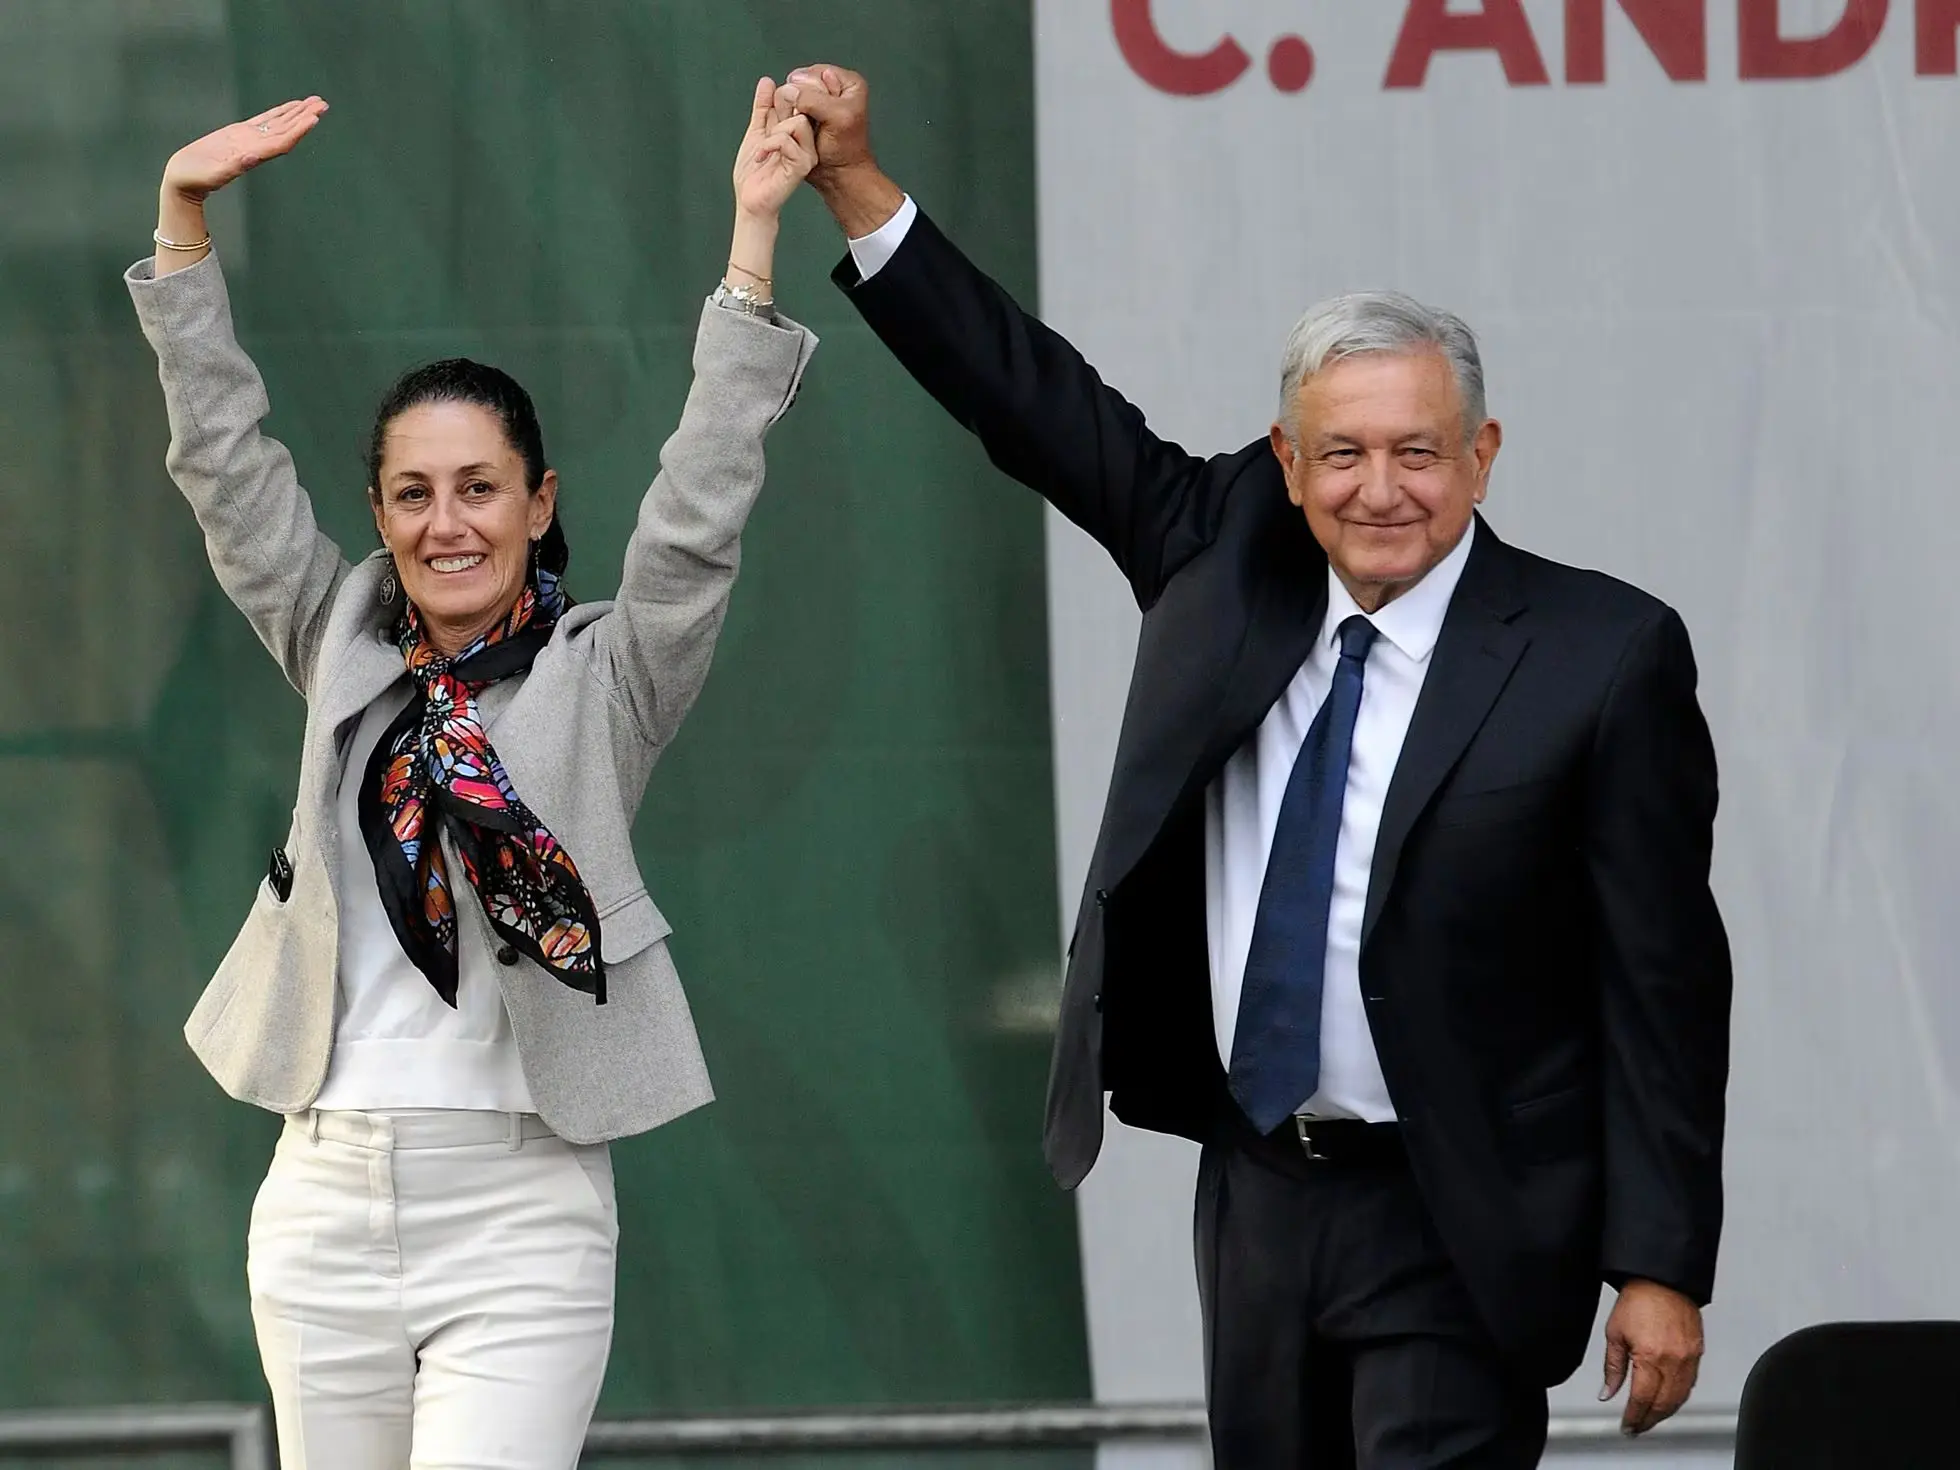 Mexico's Budget Balloons as AMLO Prepares for Election - Claudia Sheinbaum and AMLO. (Photo Internet reproduction)